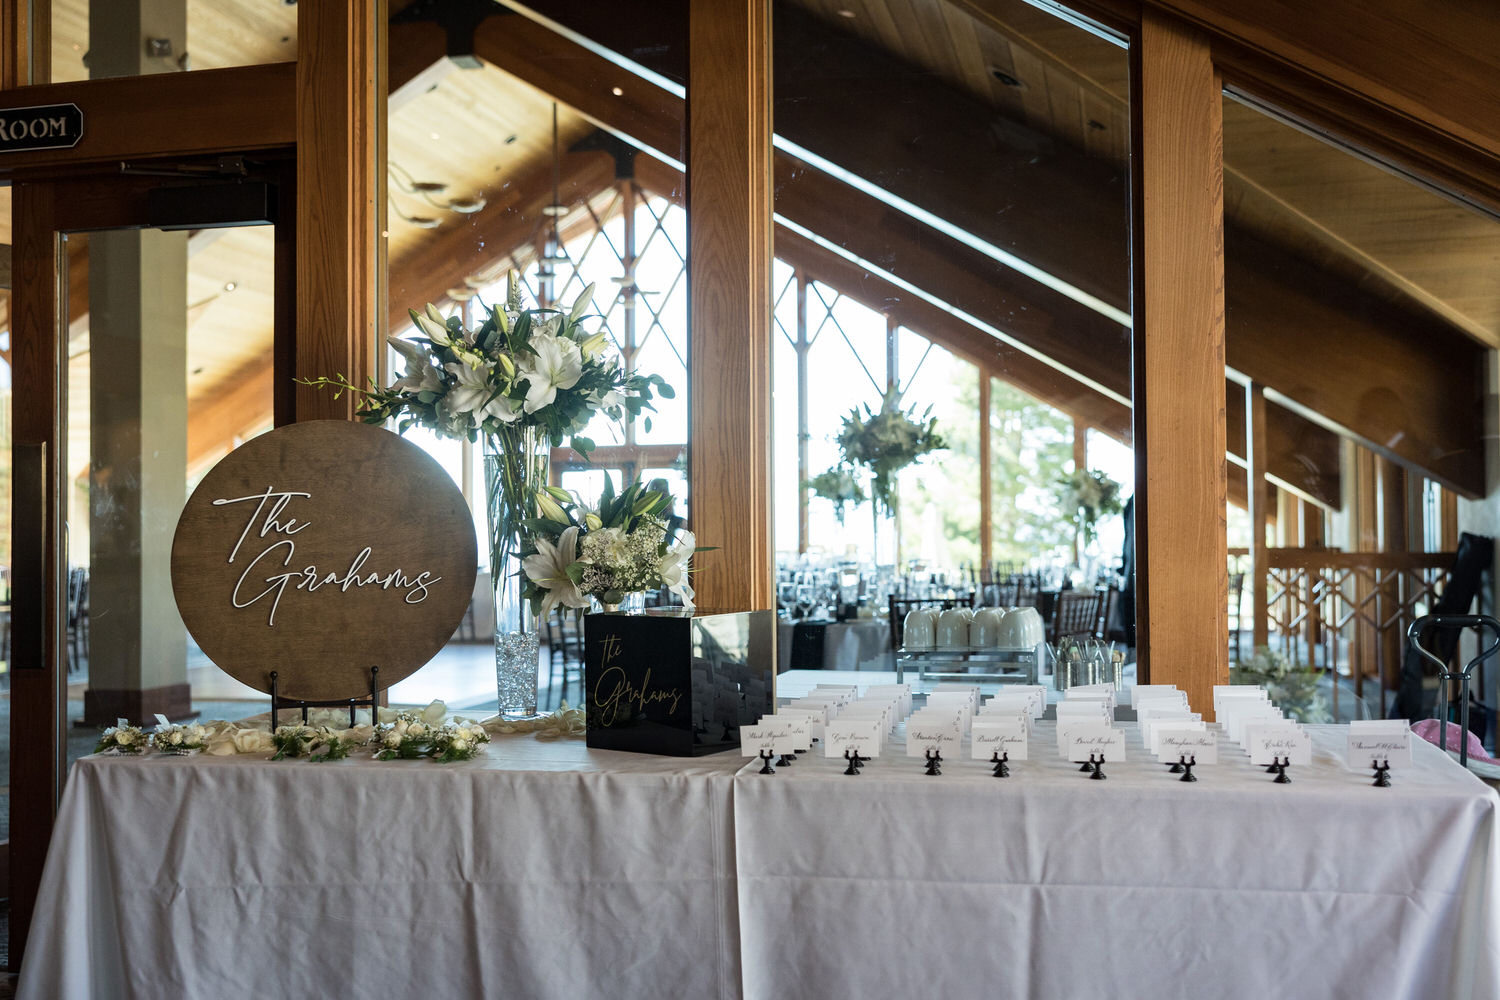 Wedding reception welcome table idea with name cards and a white floral arrangement.